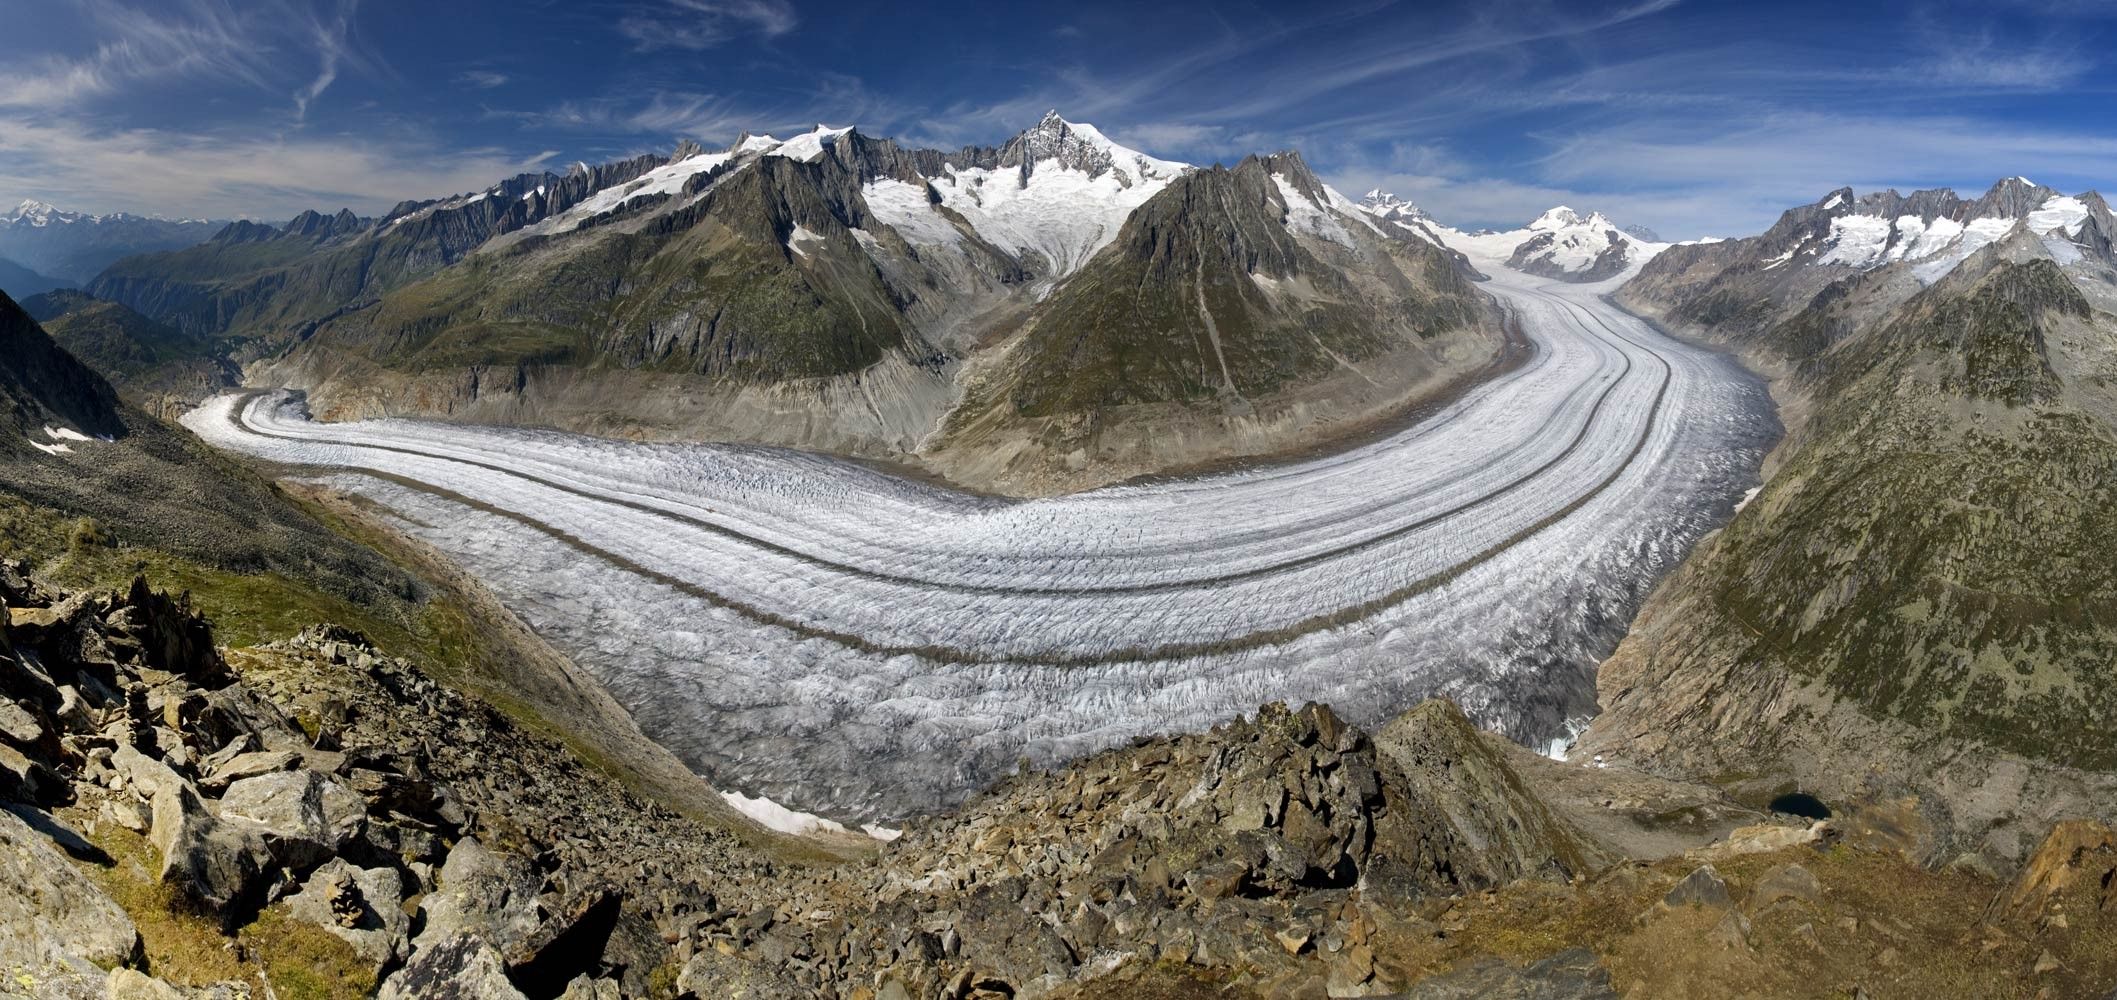 Alpine Glacier Wall Mural: Nature: Landscapes: A panoramic photo ...